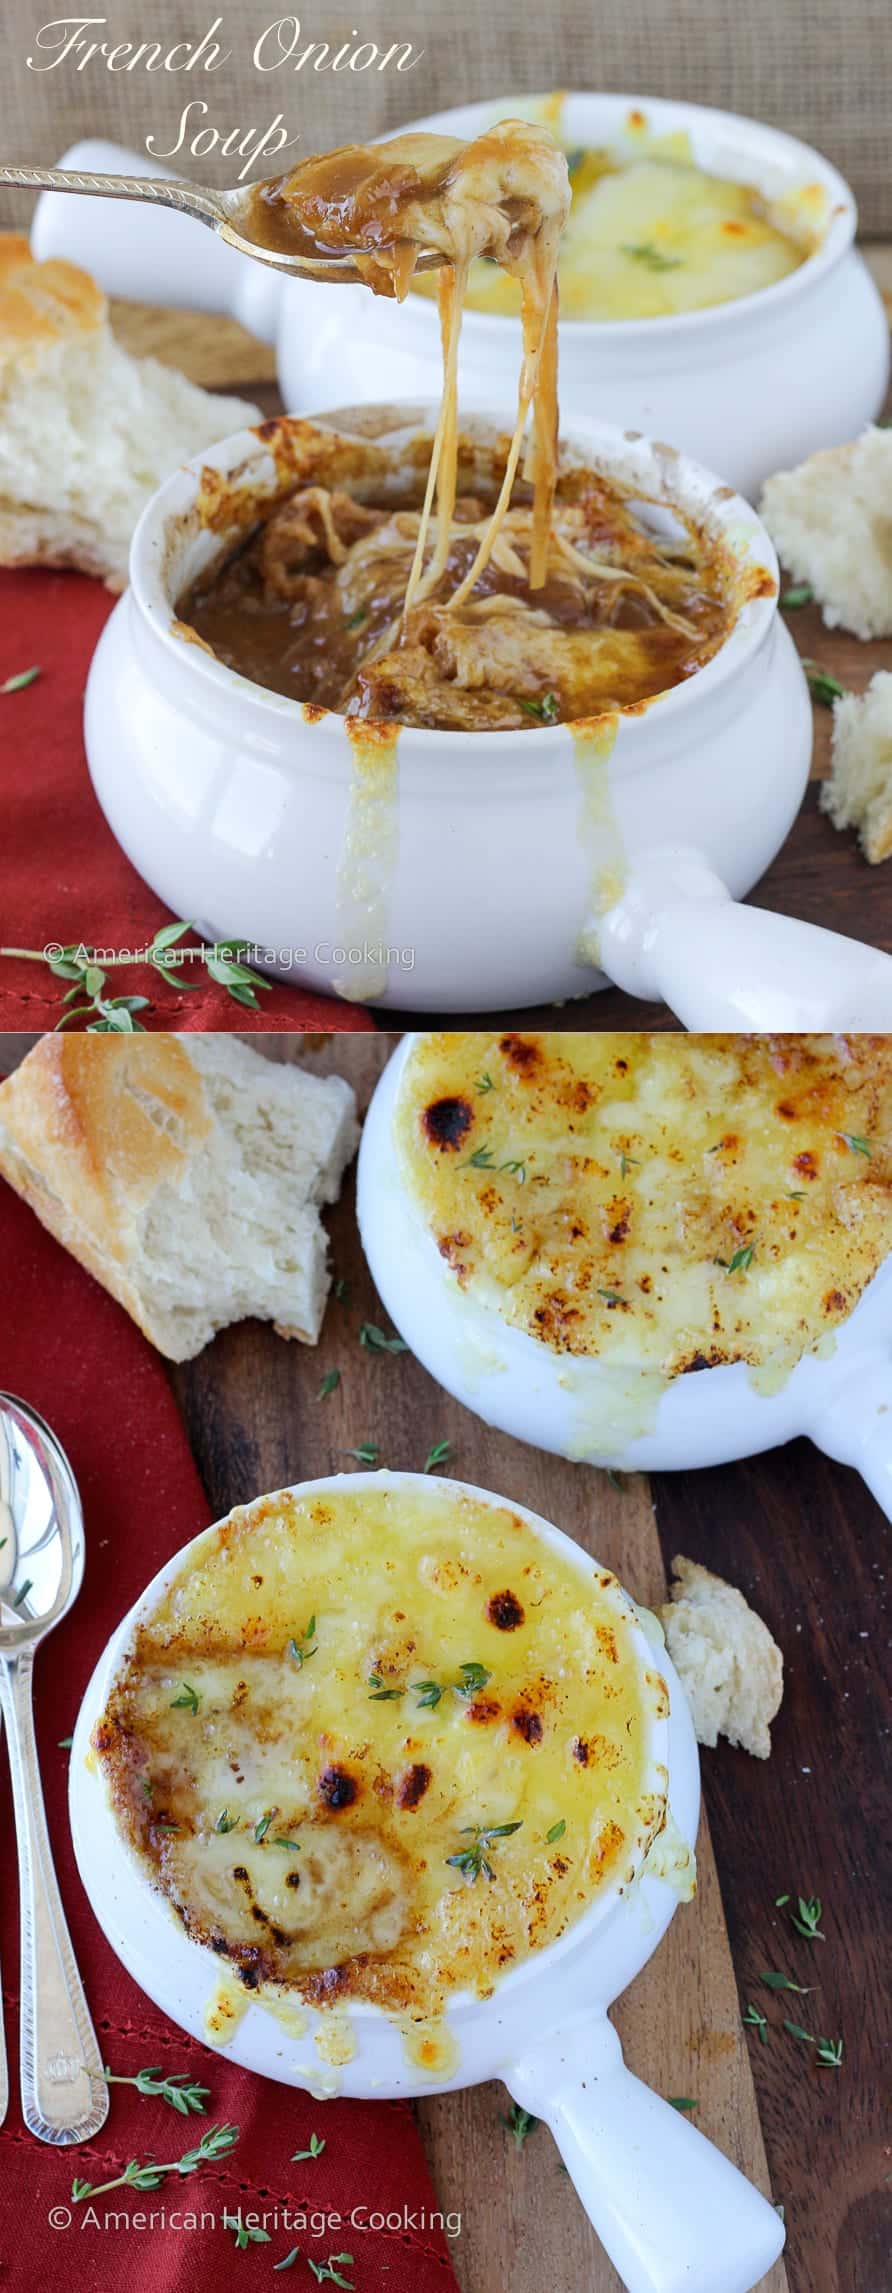 Homemade French onion soup in white bowls with melted cheese on top and little brown bubbling cheese spots.